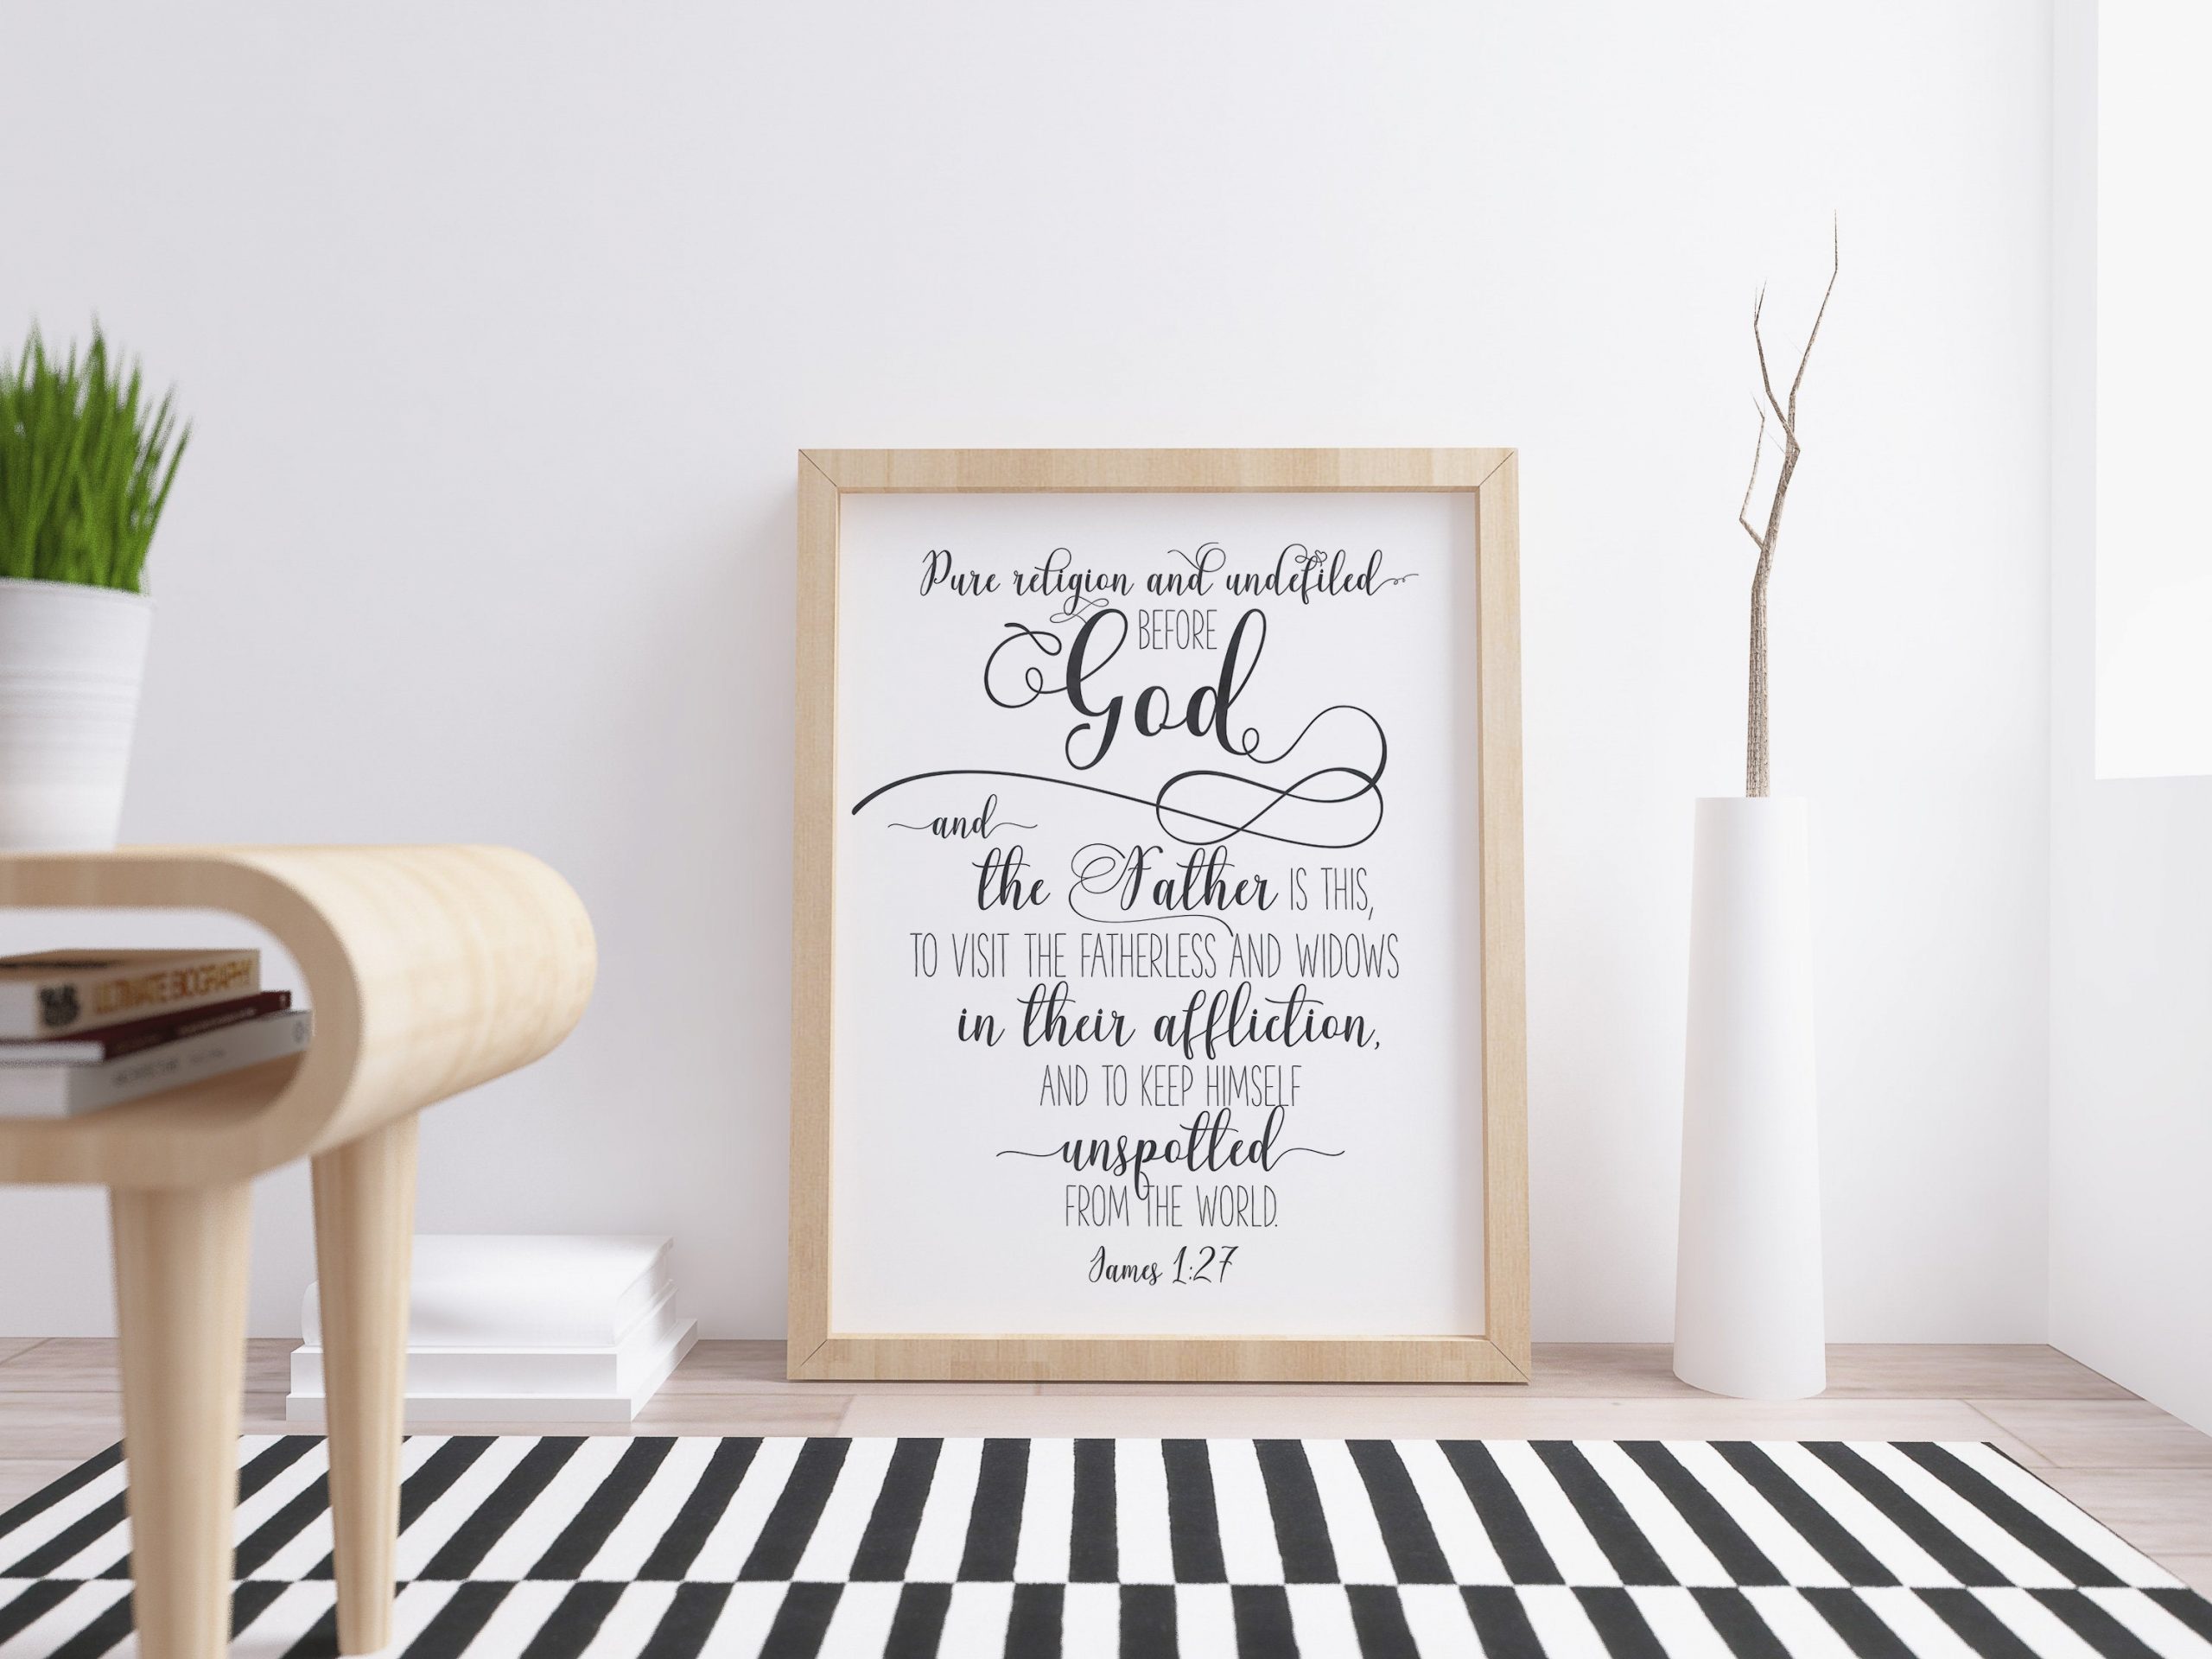 Pure Religion And Undefiled Before God And The Father Is This, James 1:27, Printable Bible Verse